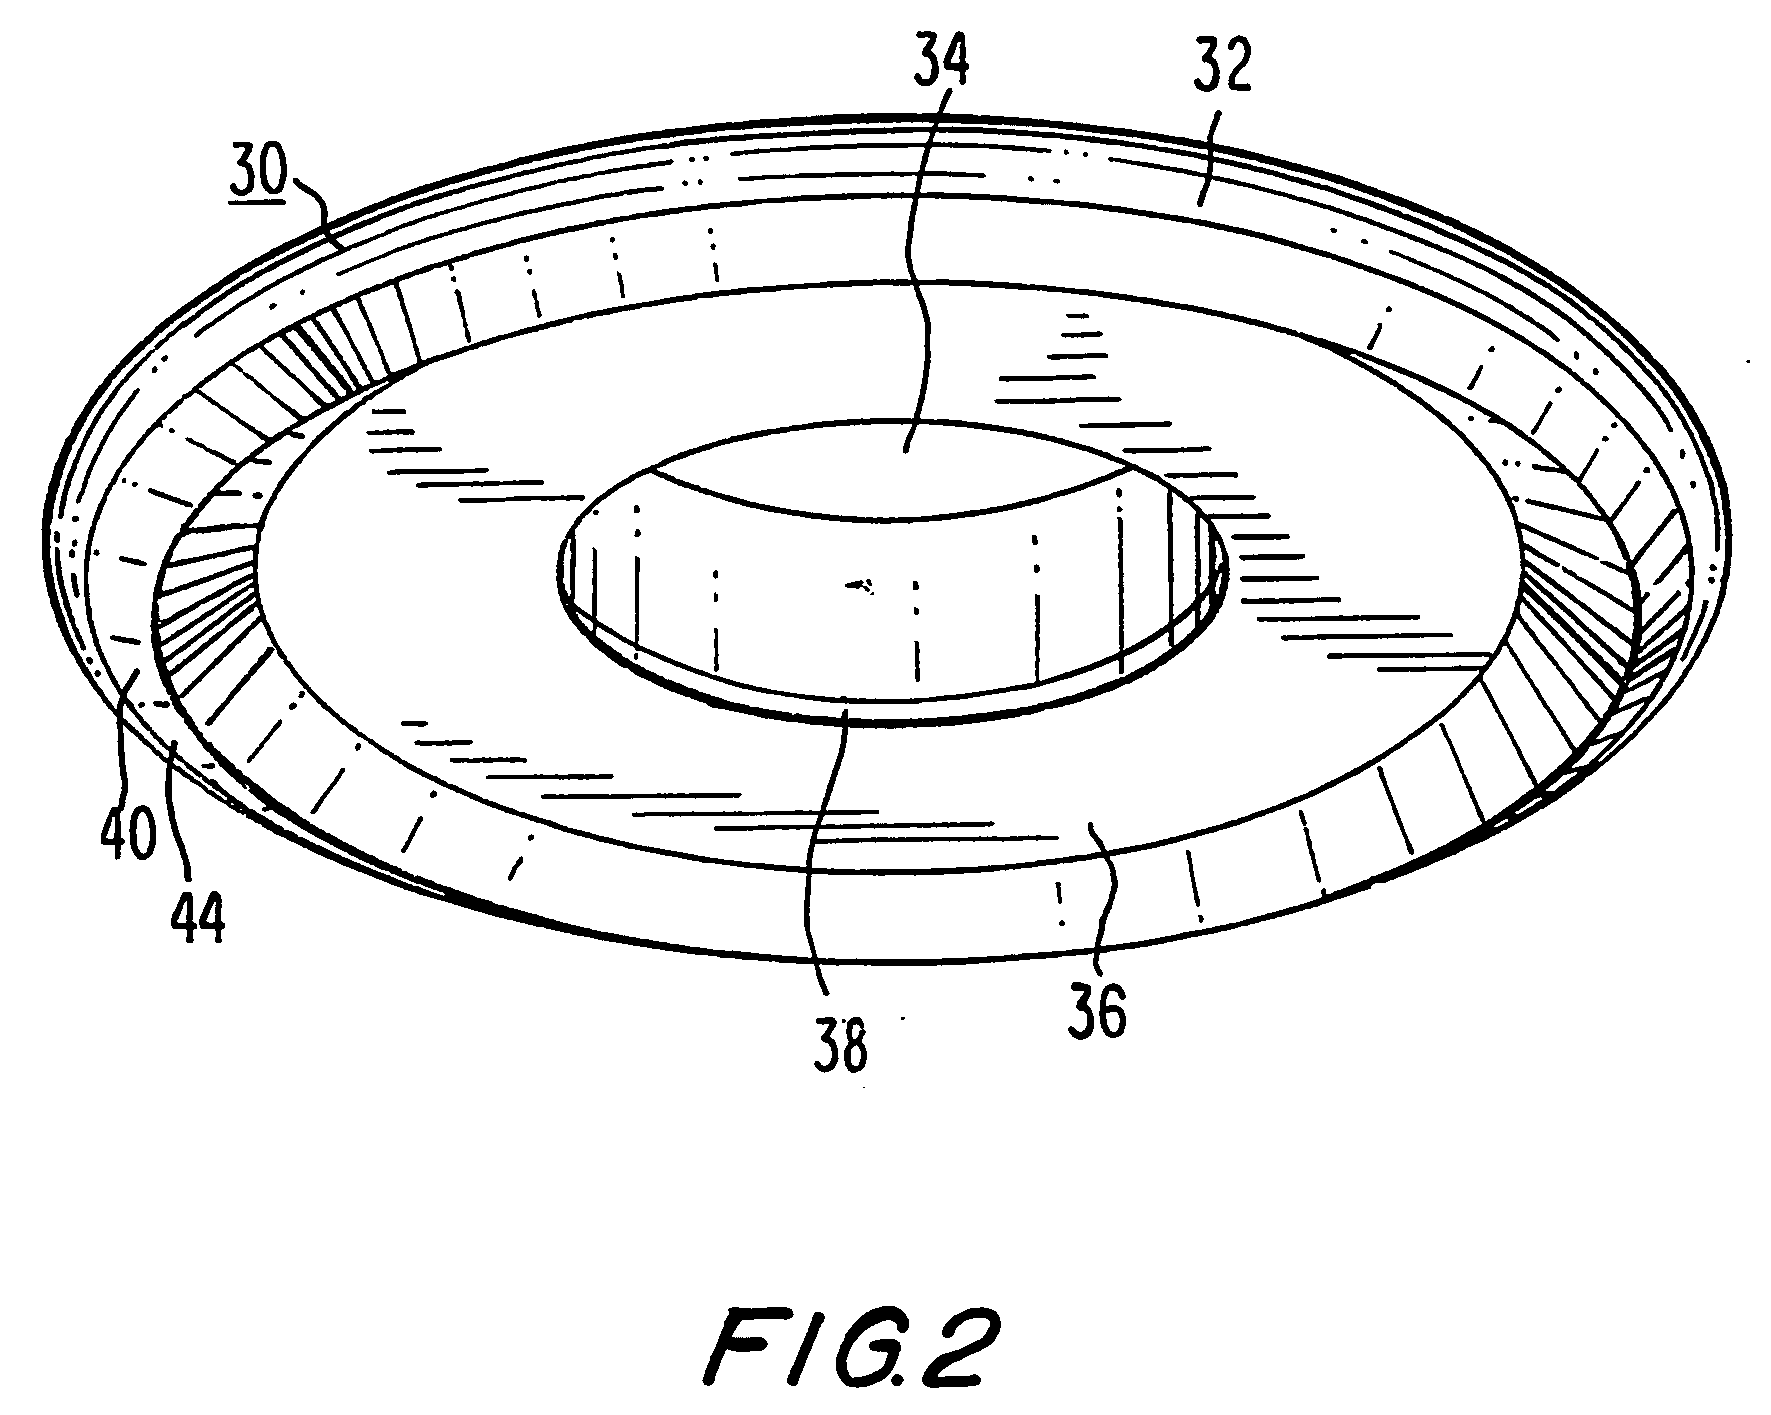 Magnetic devices and applications for medical/surgical procedures and methods for using same